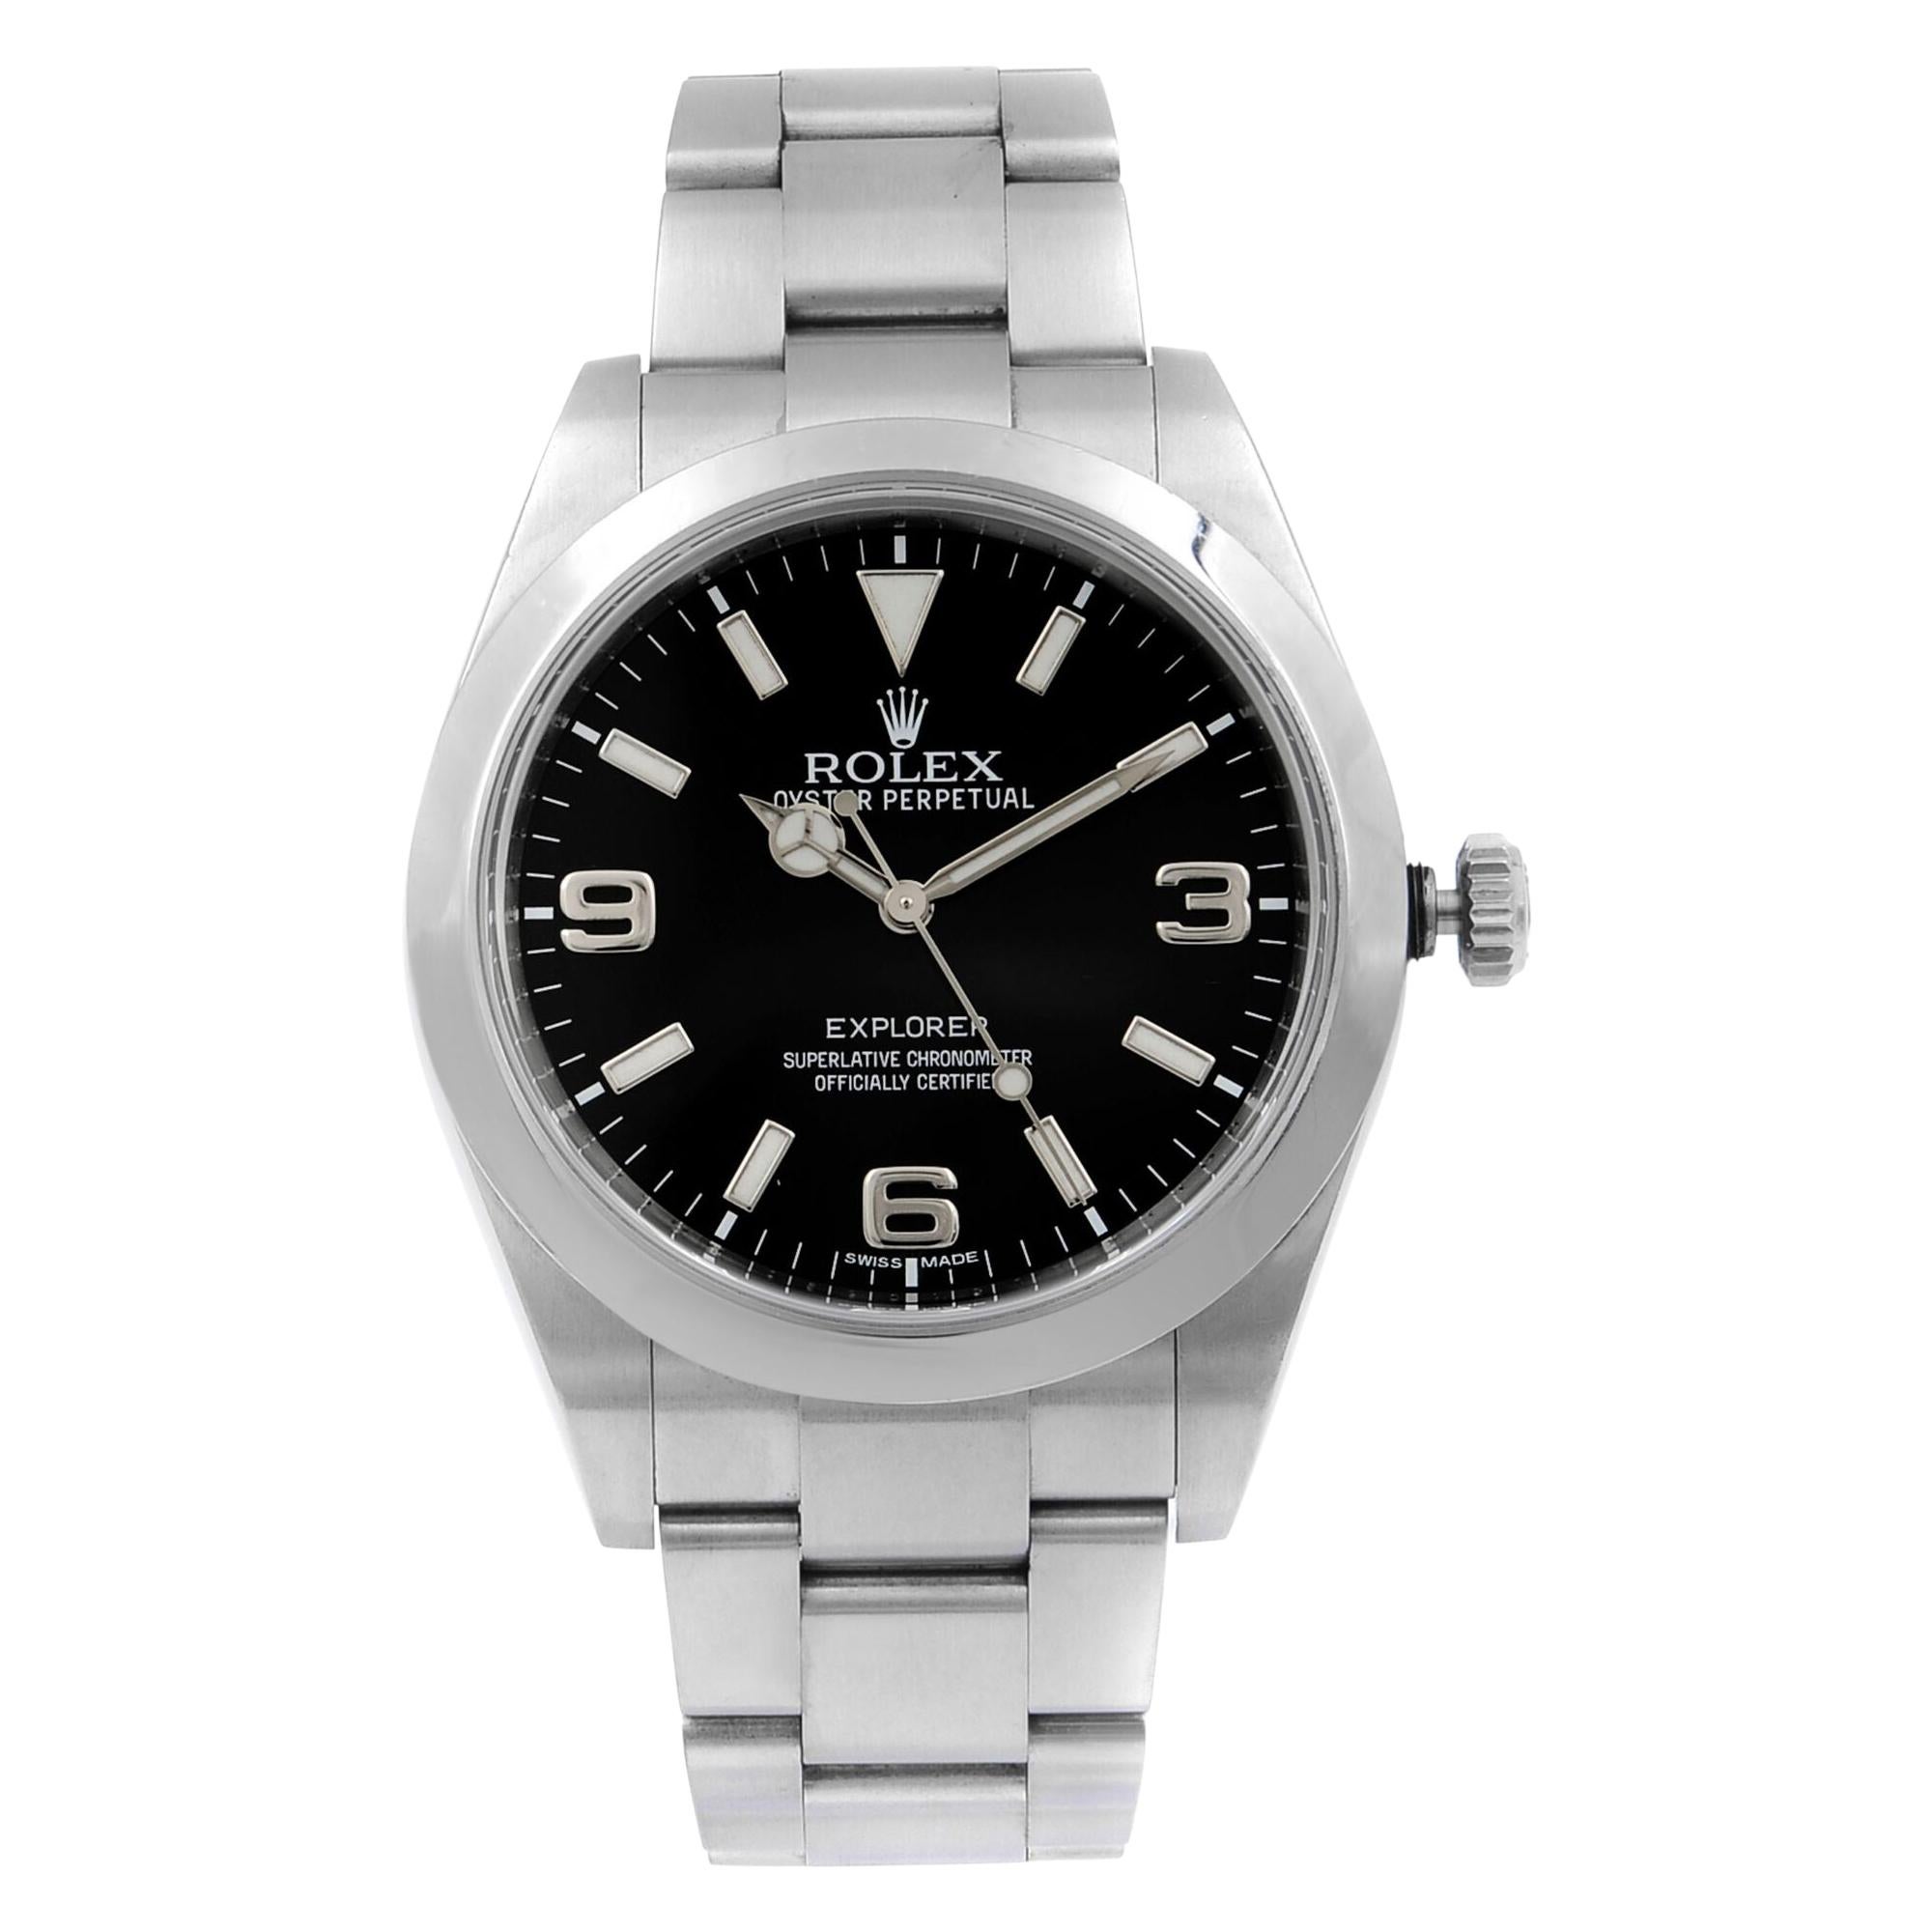 Rolex Explorer Stainless Steel Black Dial Automatic Men's Watch 214270